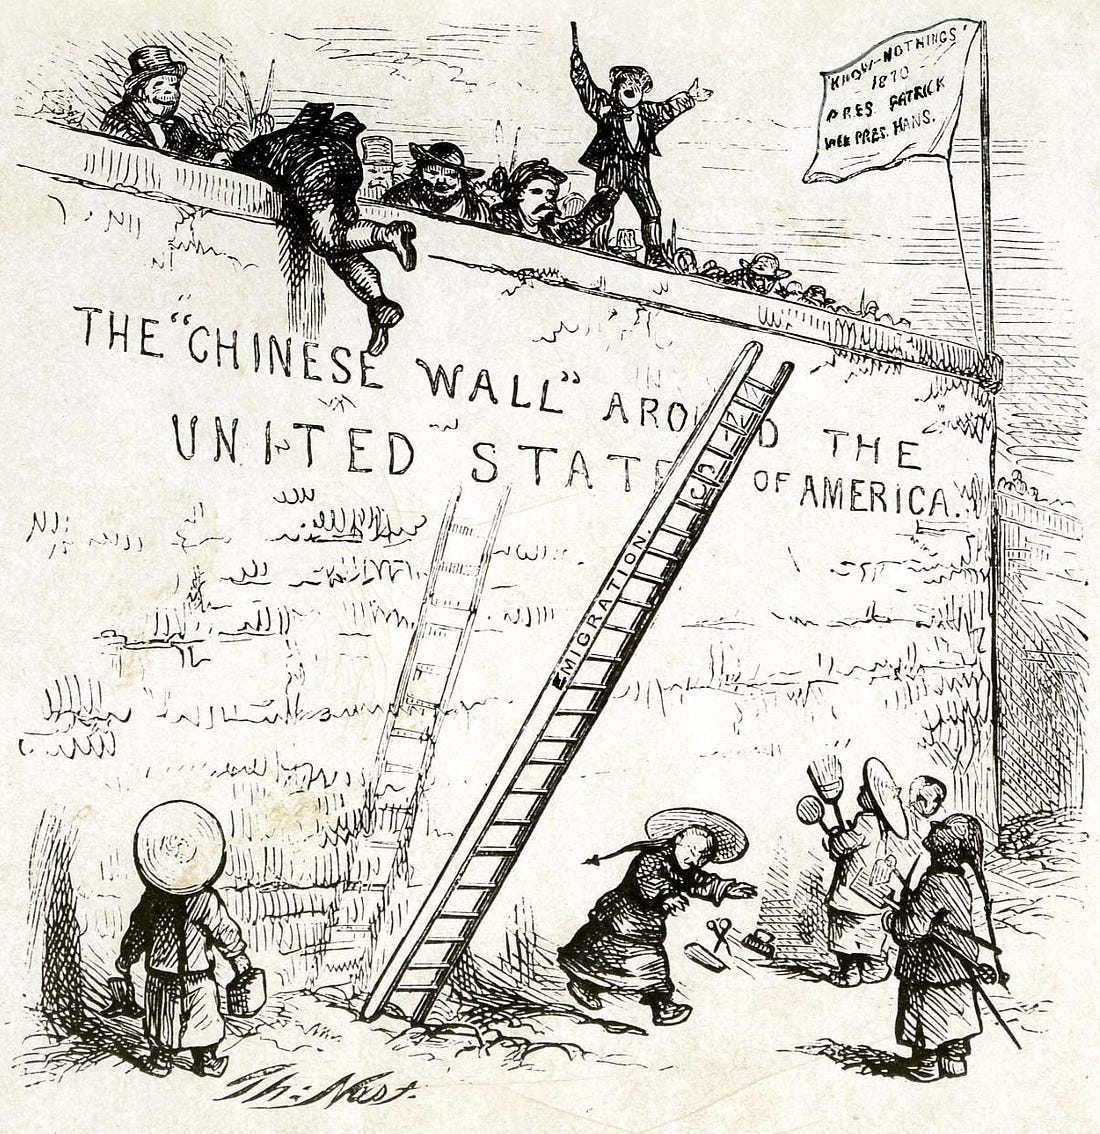 Chinese Exclusion Act | Definition, History, & Facts | Britannica